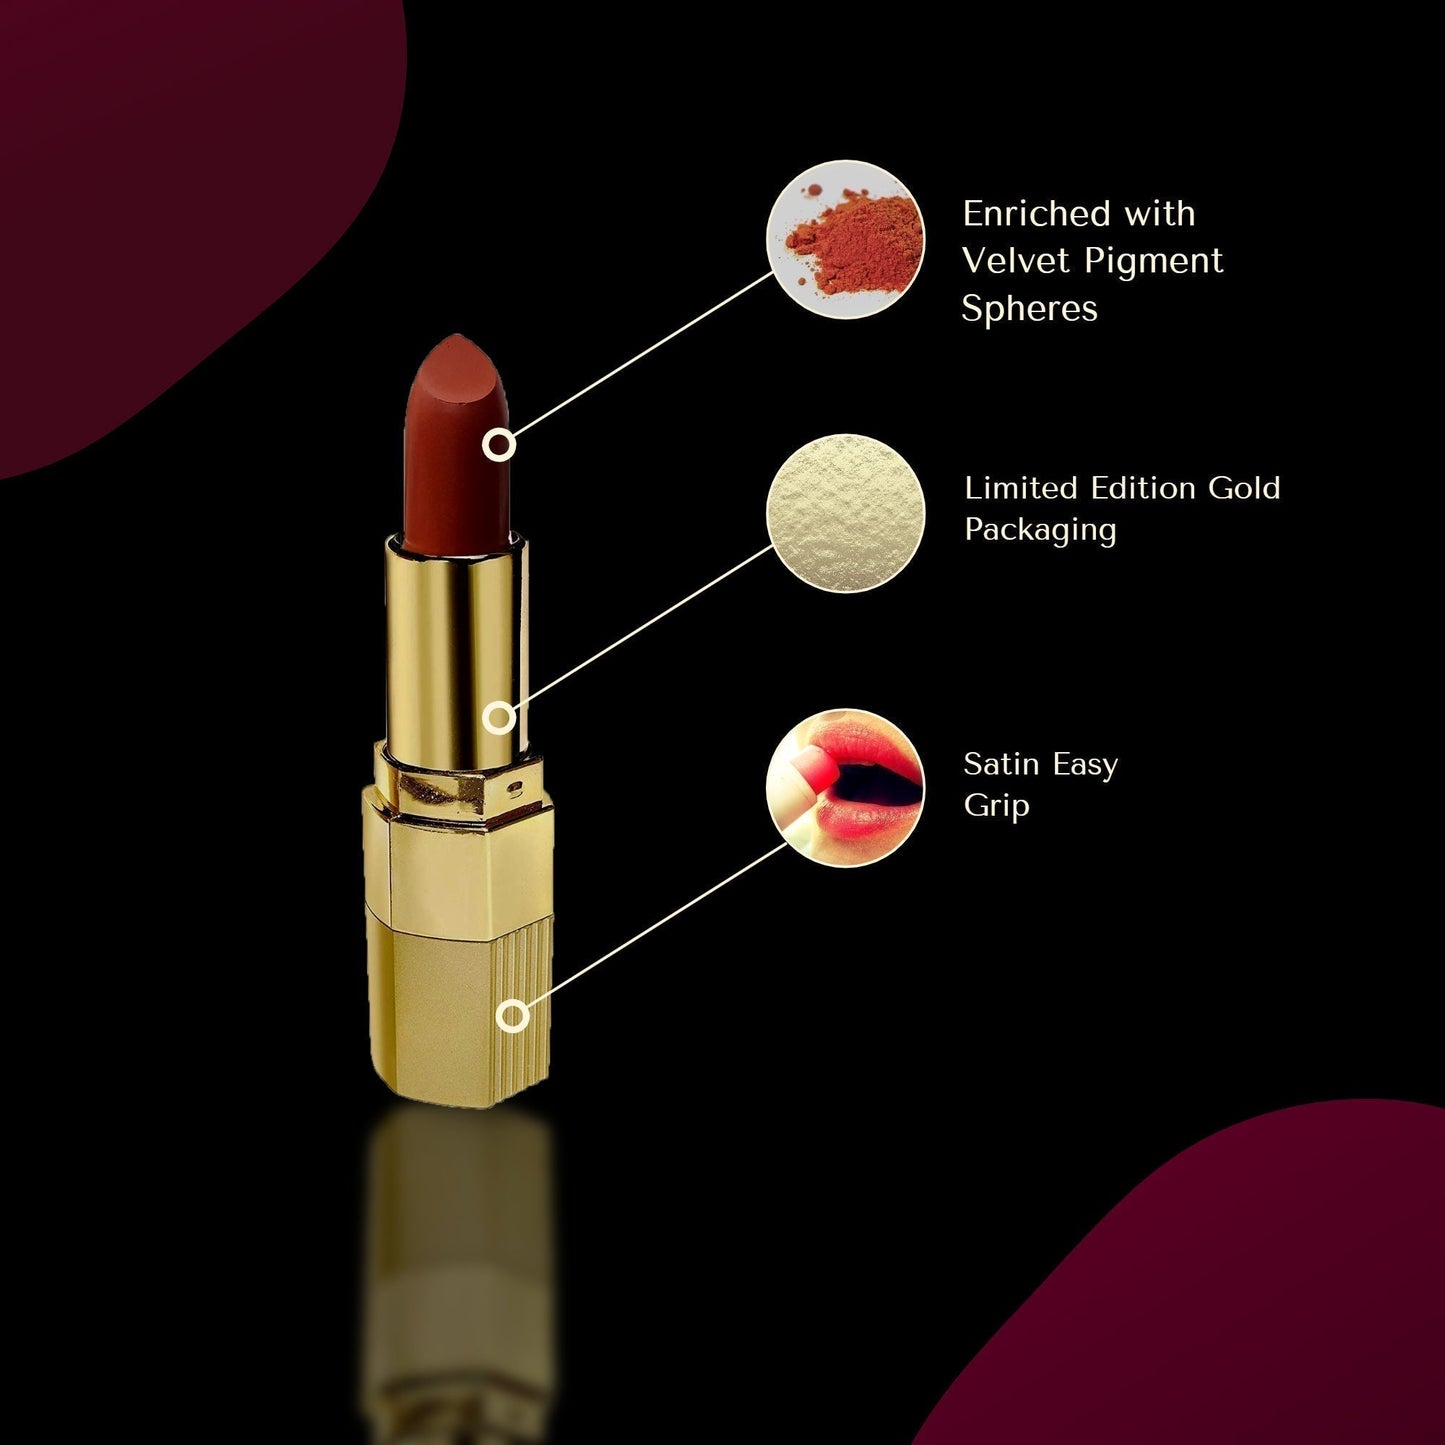 Krayons Desire Lipstick, Highly Pigmented, Longlasting, 3.5g Each, Combo, Pack of 3 (Caramel Brown, Magic Pink, Cherry Love)